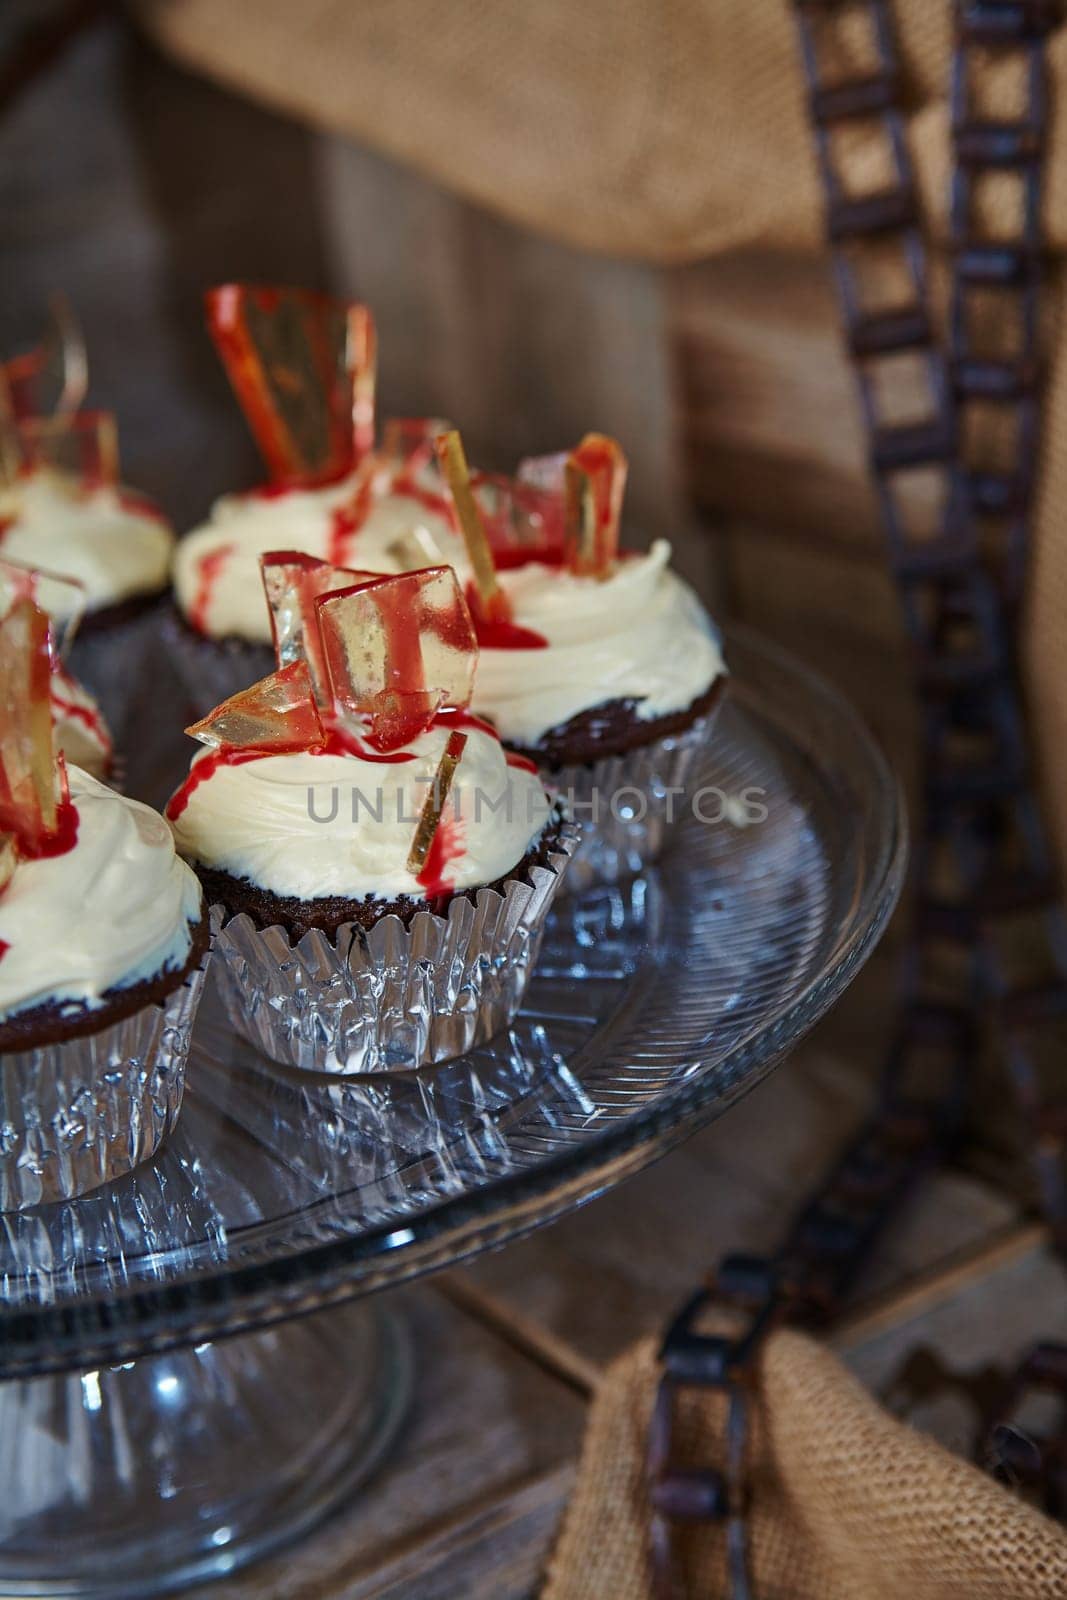 Gourmet Chocolate Cupcakes with Red Glass Candy in Rustic Setting by njproductions